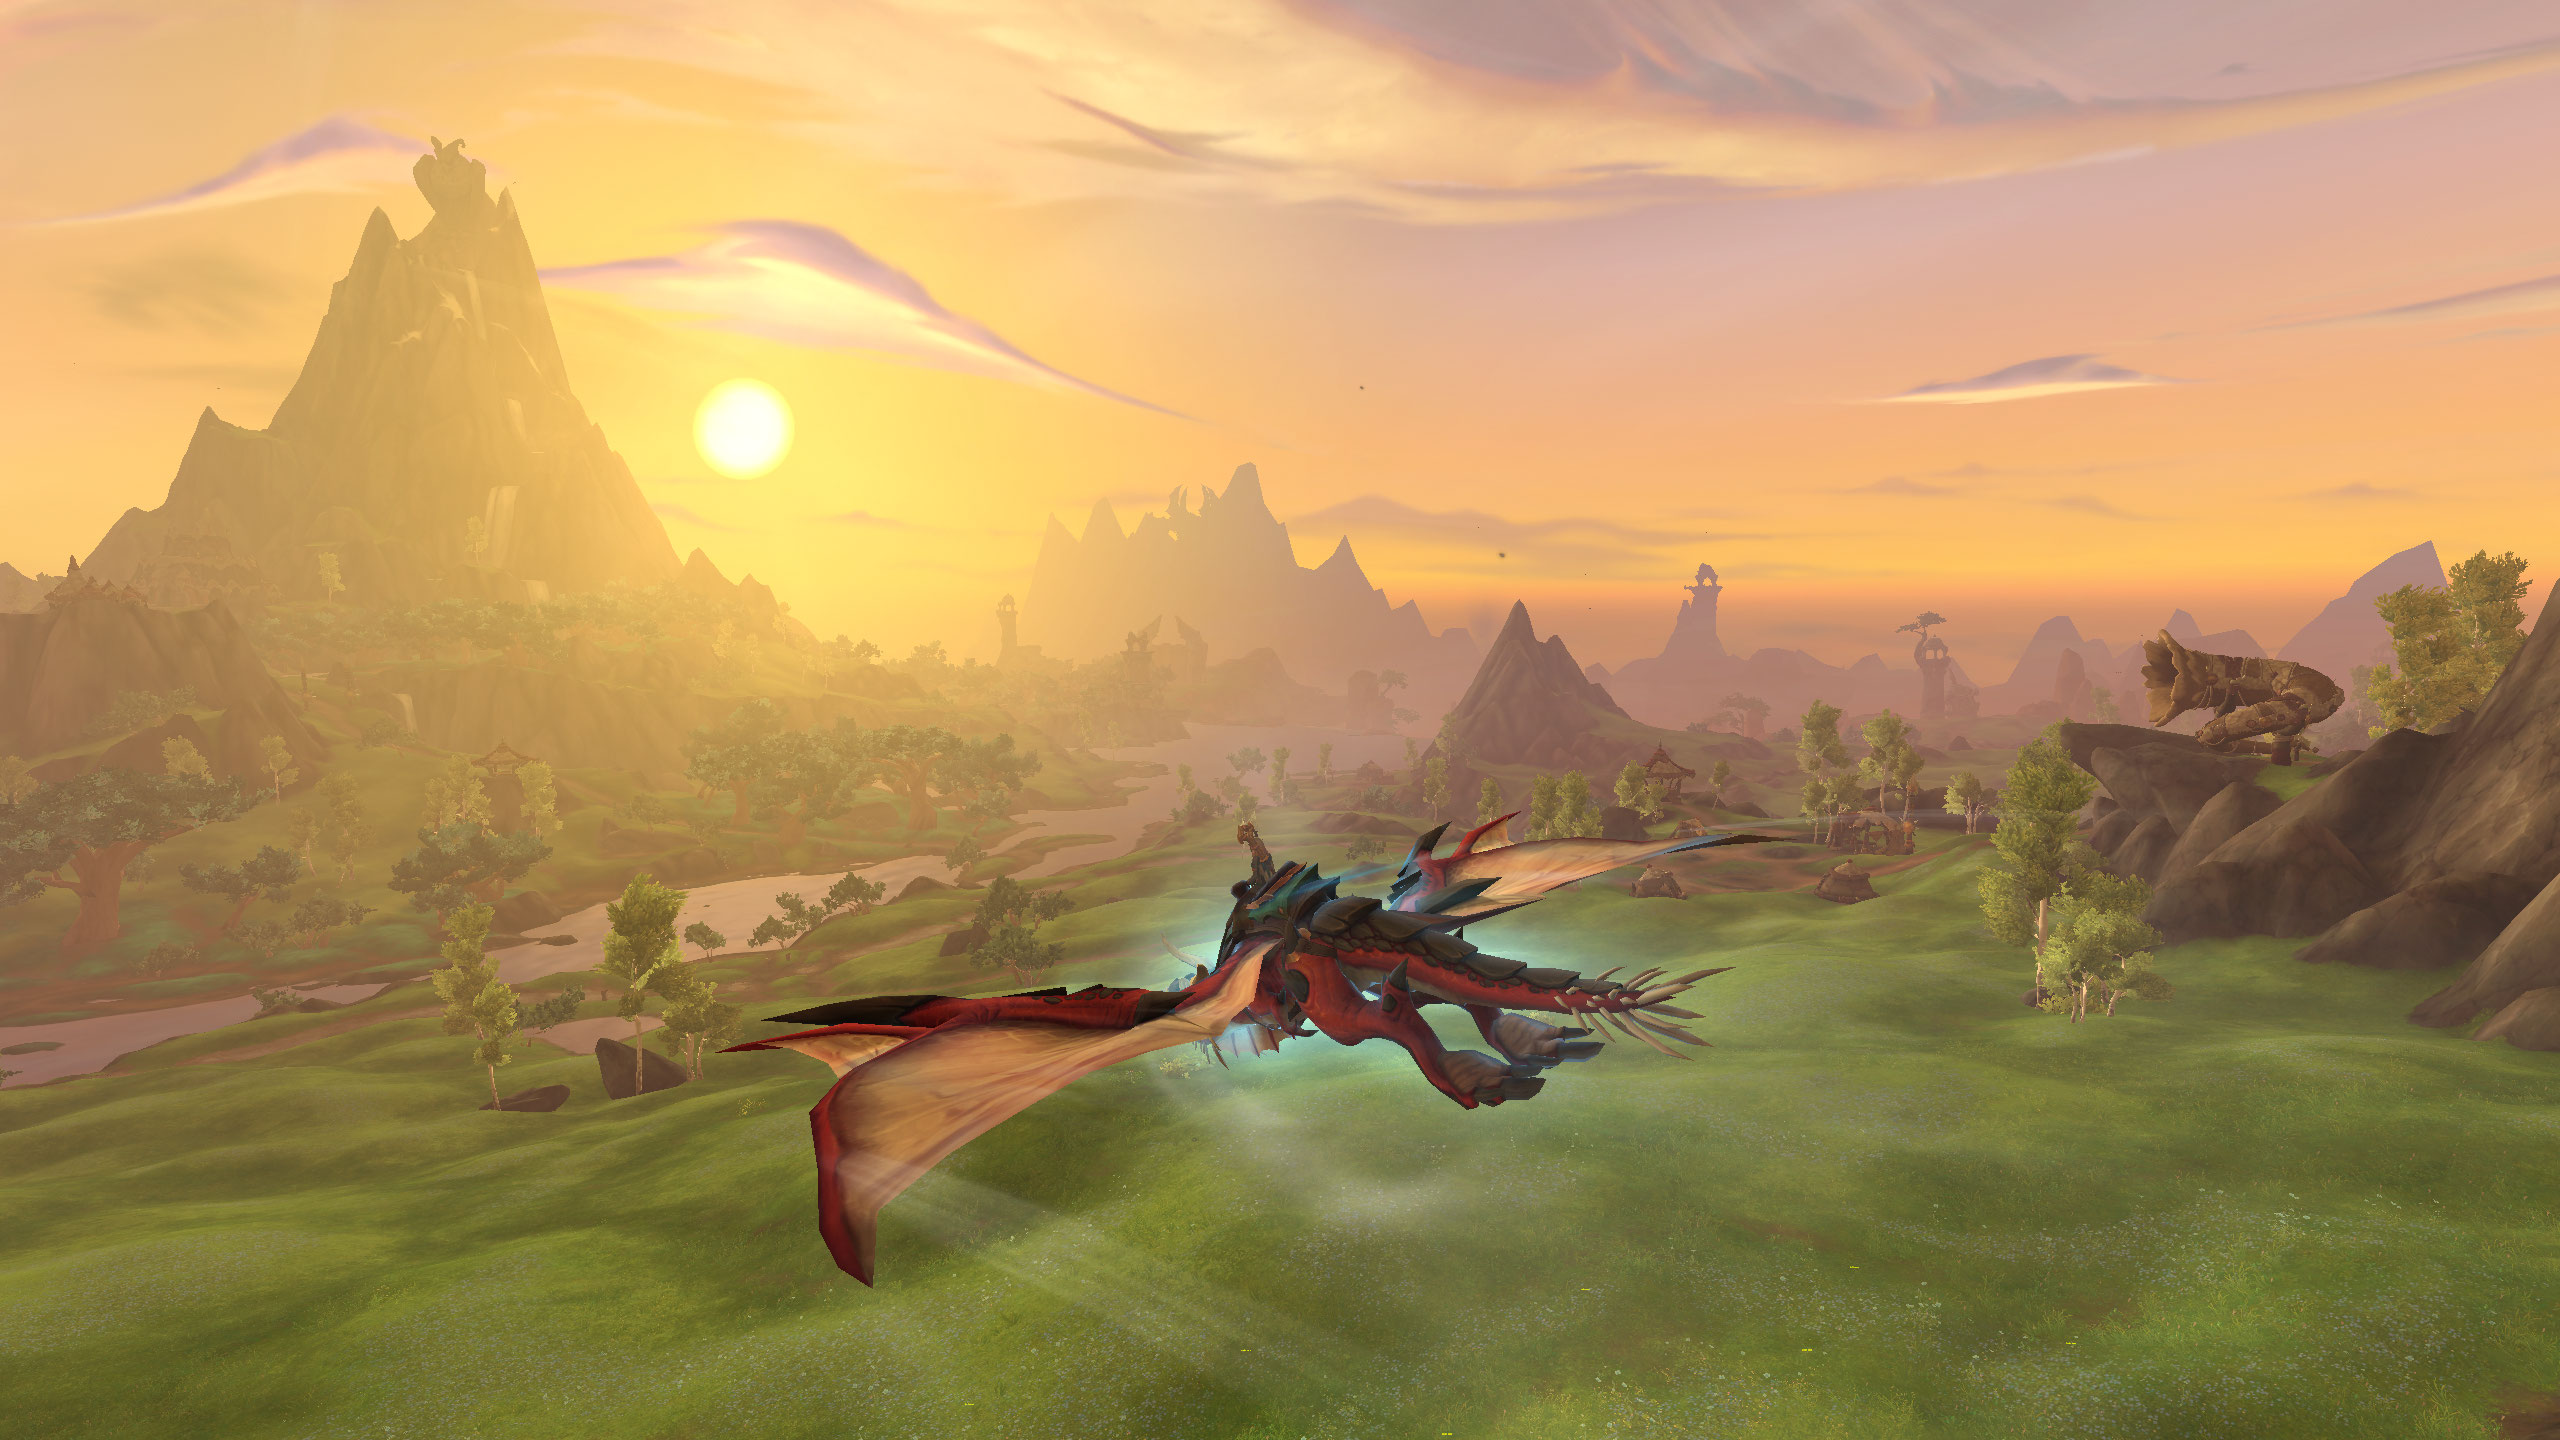 WoW dragonriding coming to all of Azeroth